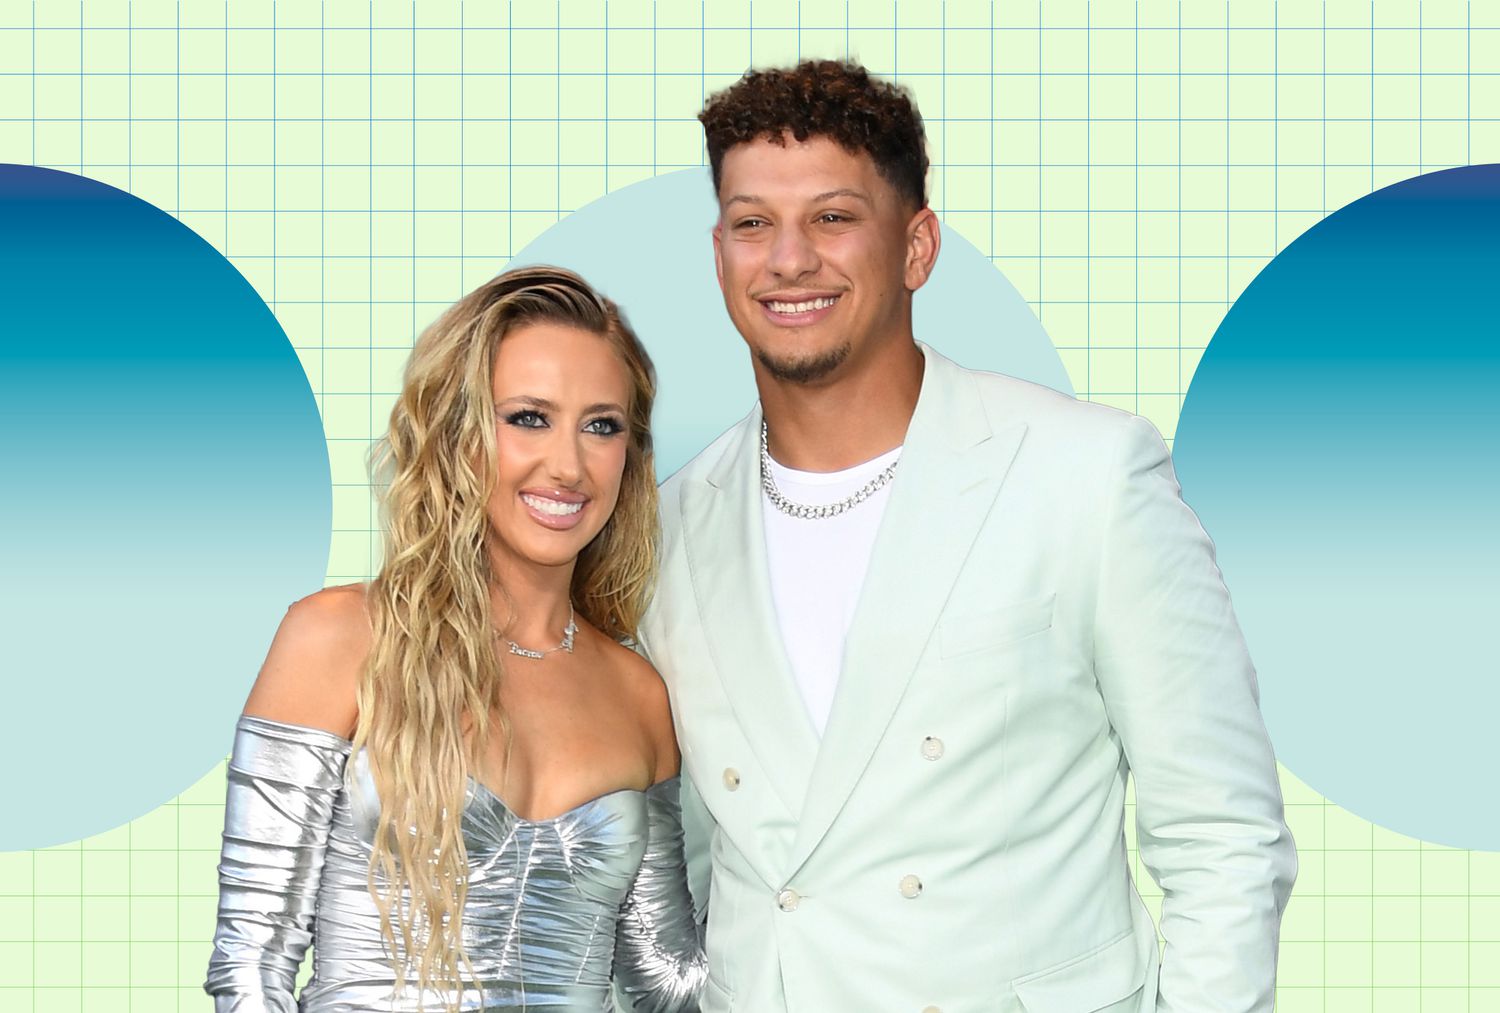 "Patrick Mahomes Responds to Critics Condemning Wife Brittany Mahomes' Outfit, Asserts Happiness and Comfort, Declares It's Nobody's Business"